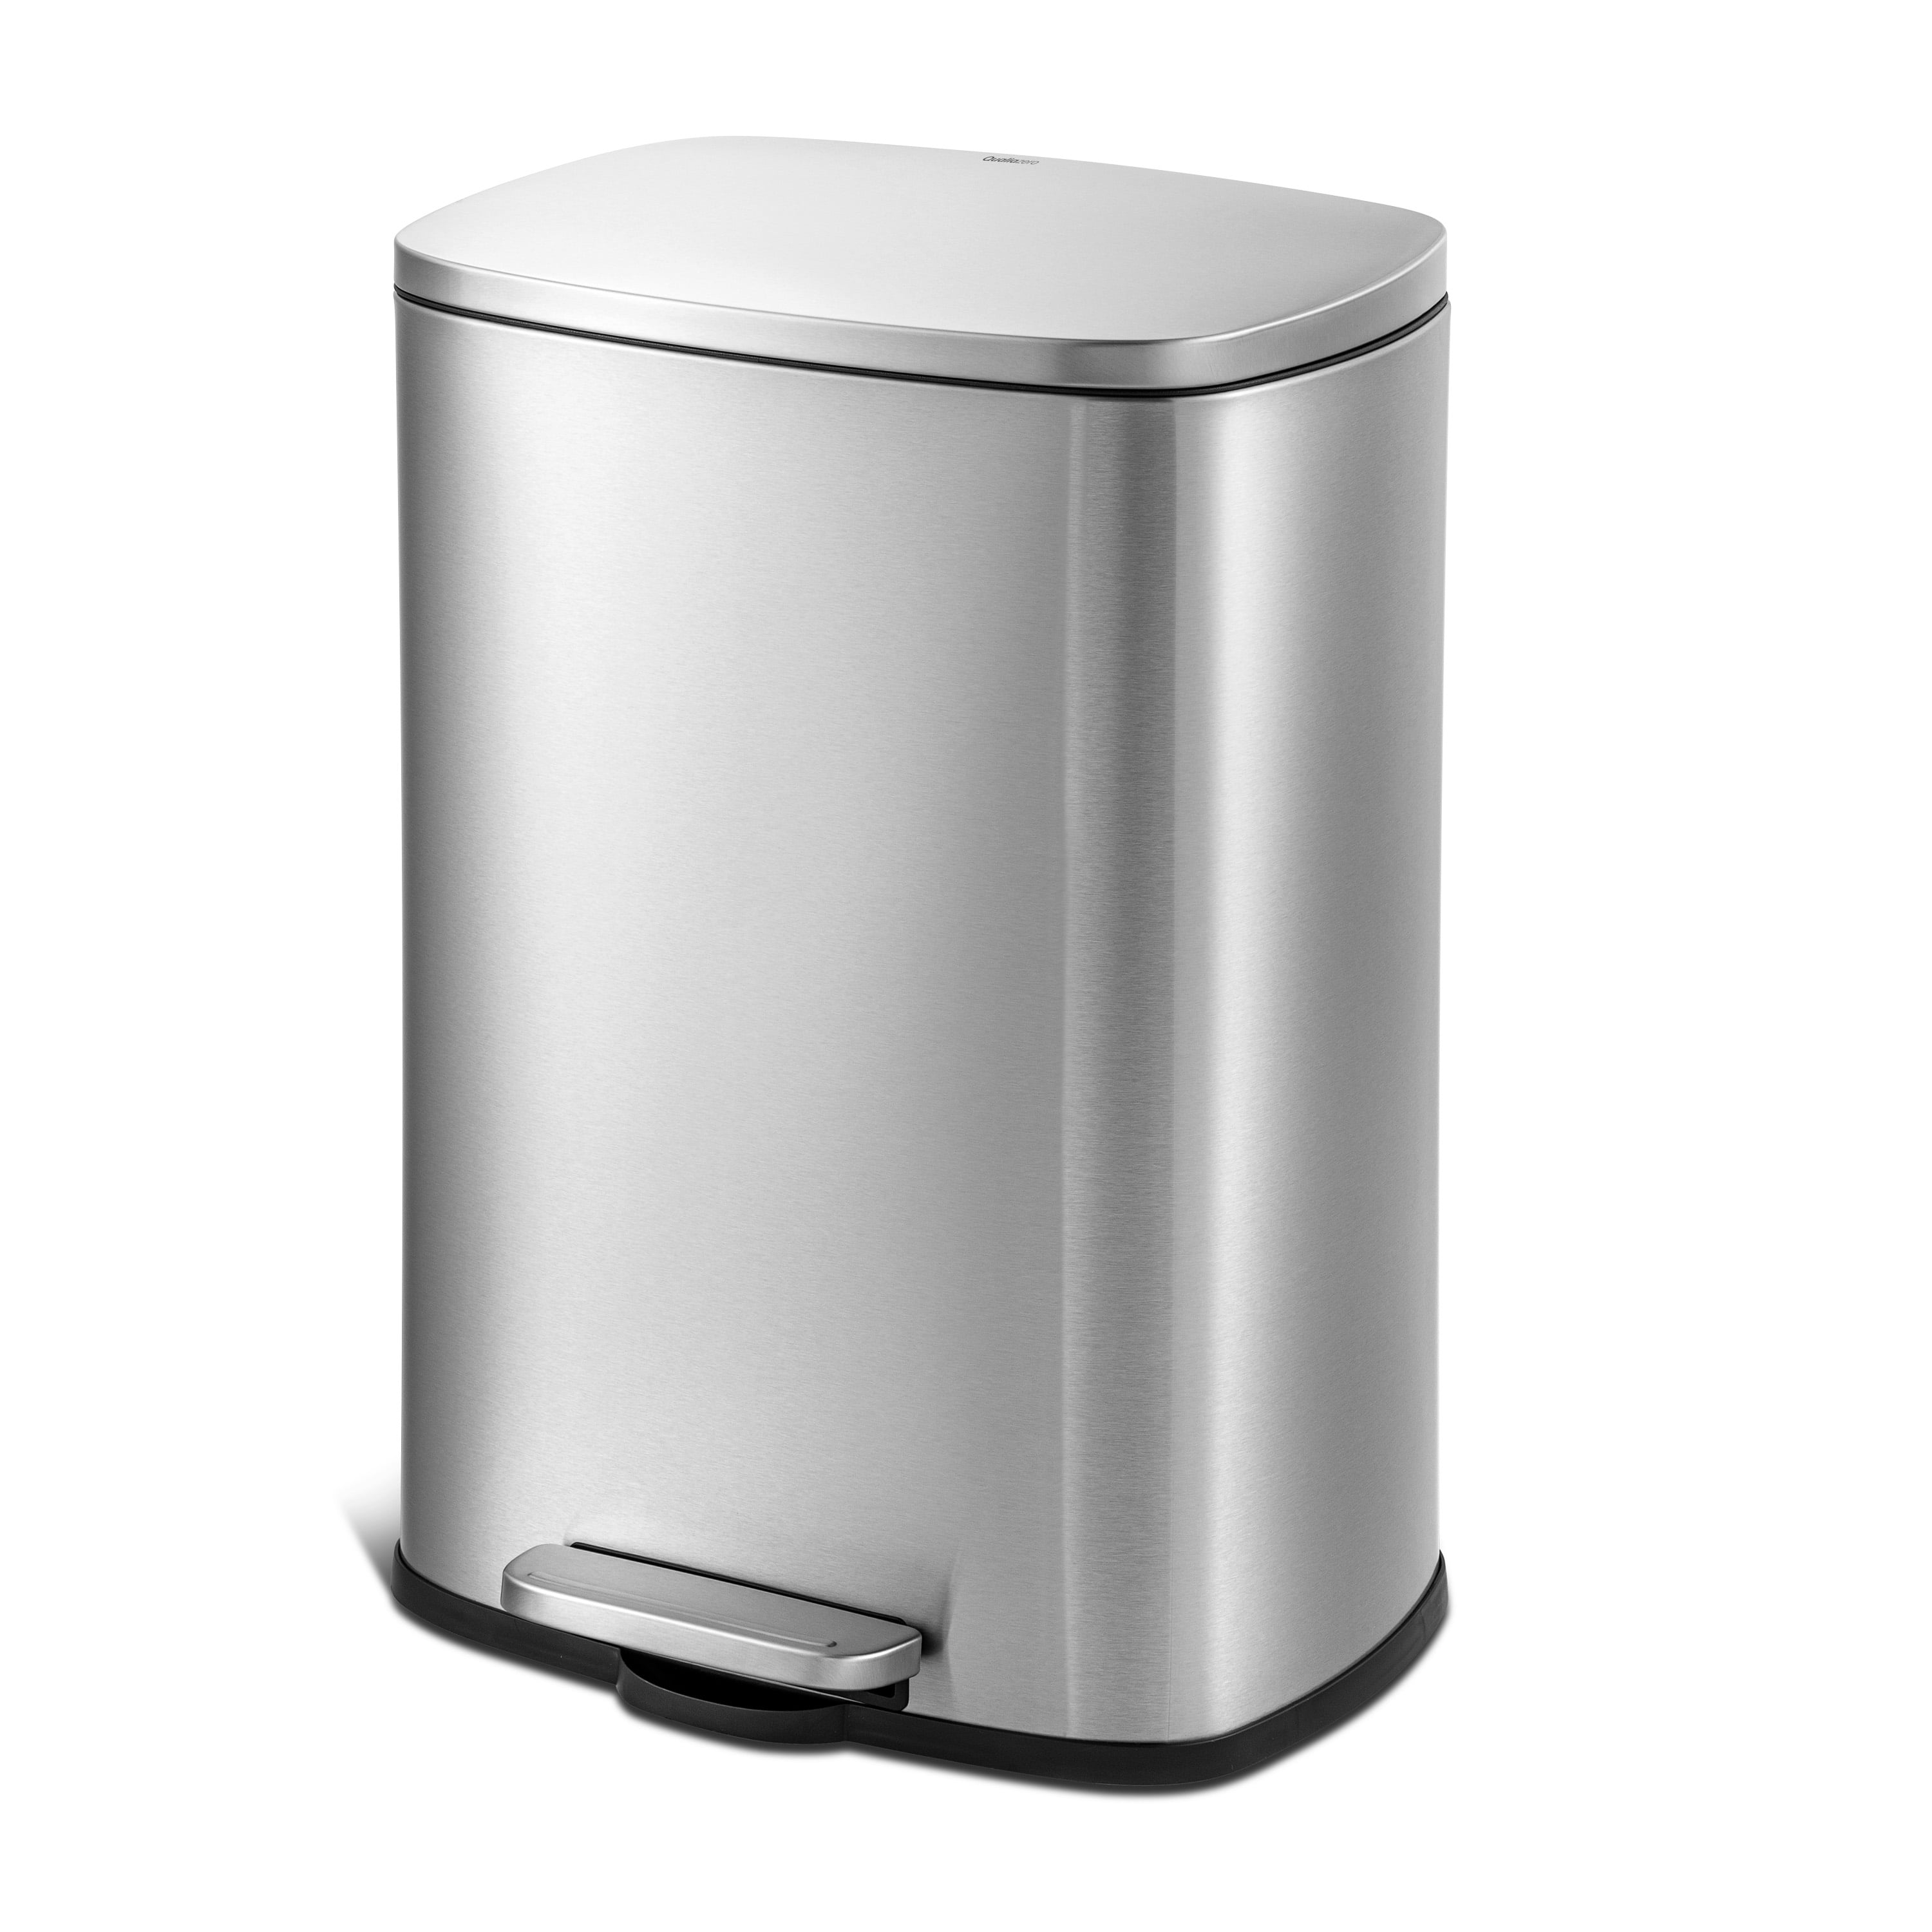 8/13 Gallon Step On Trash Can Garbage Bin Home Kitchen Dustbin Stainless Steel 